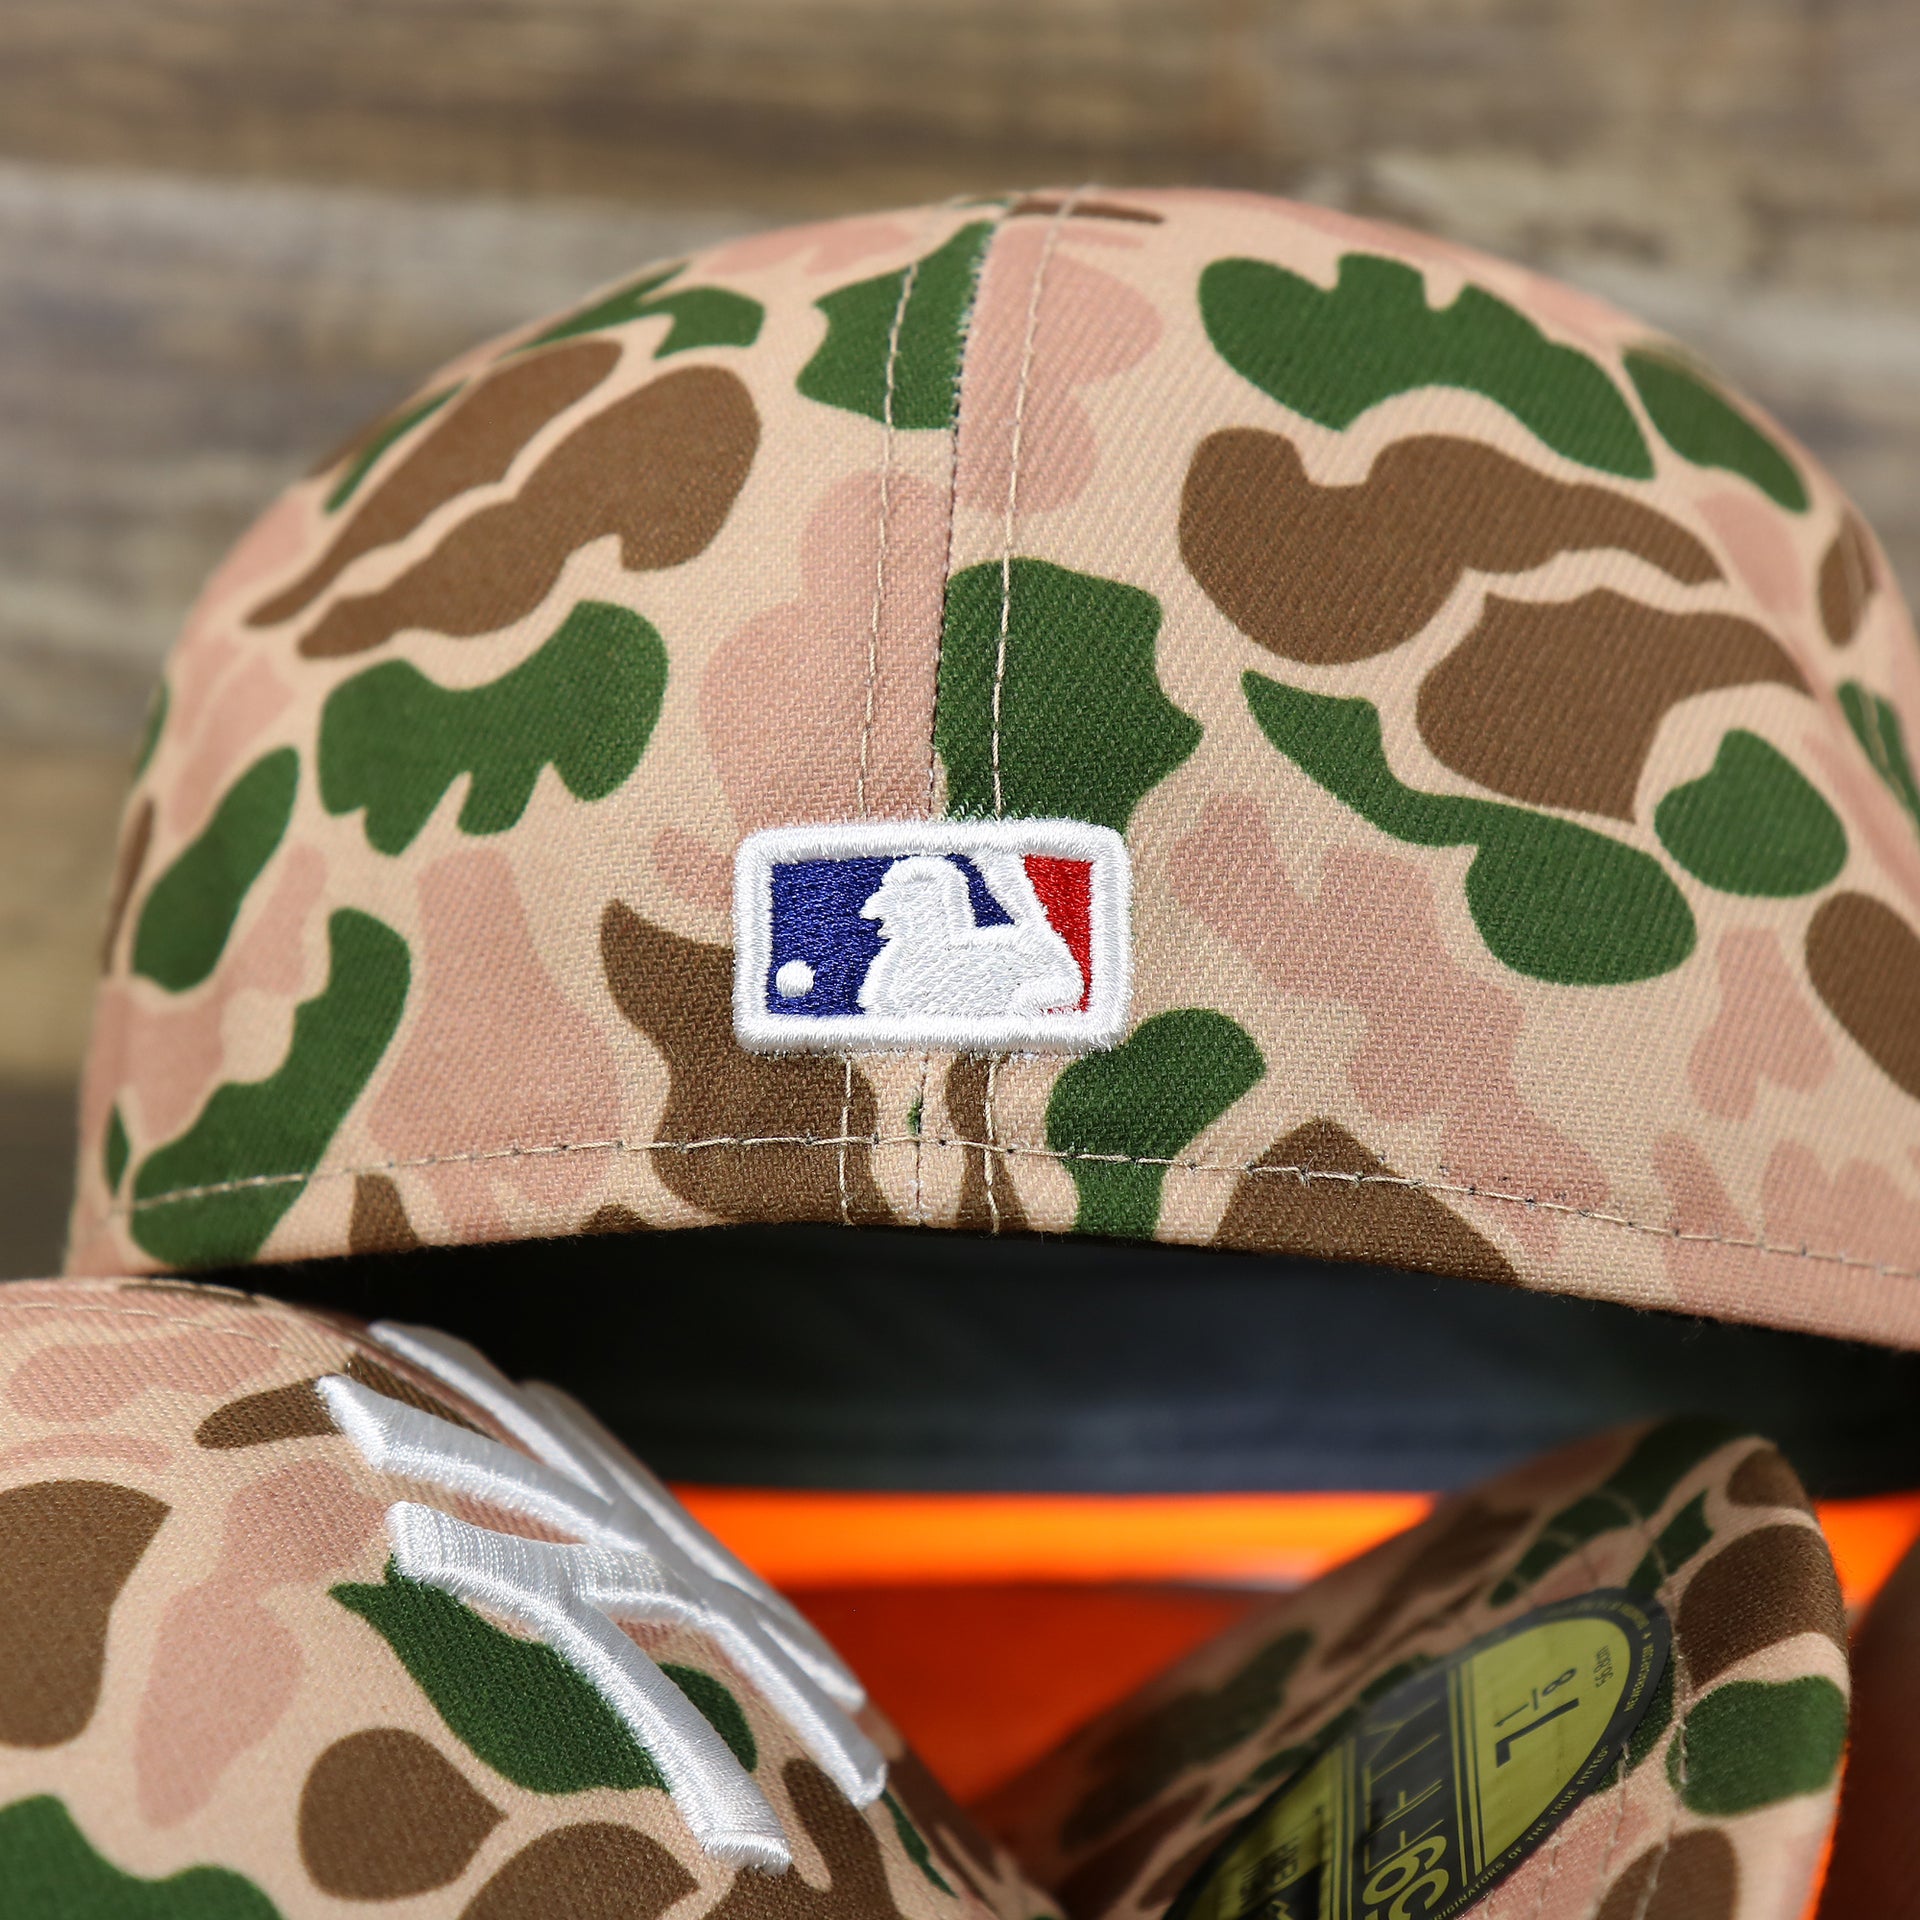 The MLB Batterman Logo on the New York Yankees Duck Camo Neon Orange Undervisor World Series Side Patch Fitted Cap | Camo Tan 59Fifty Cap